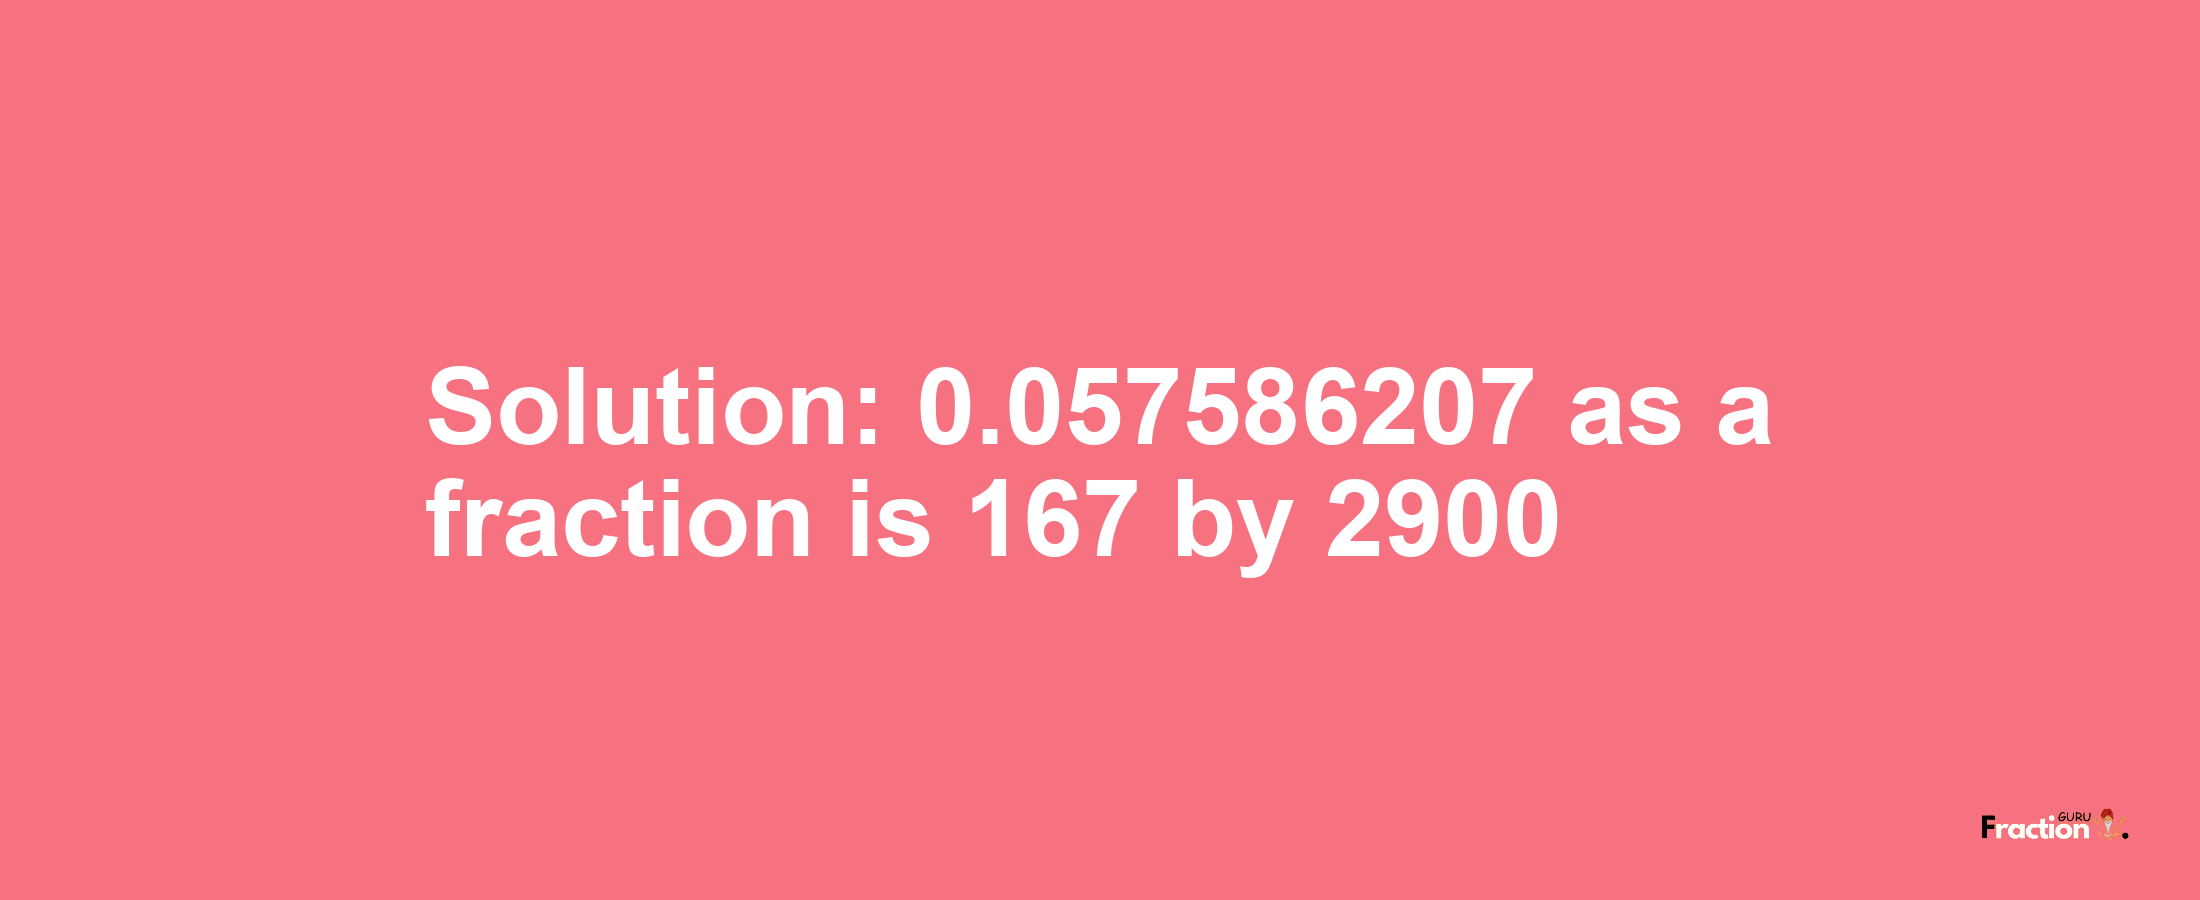 Solution:0.057586207 as a fraction is 167/2900